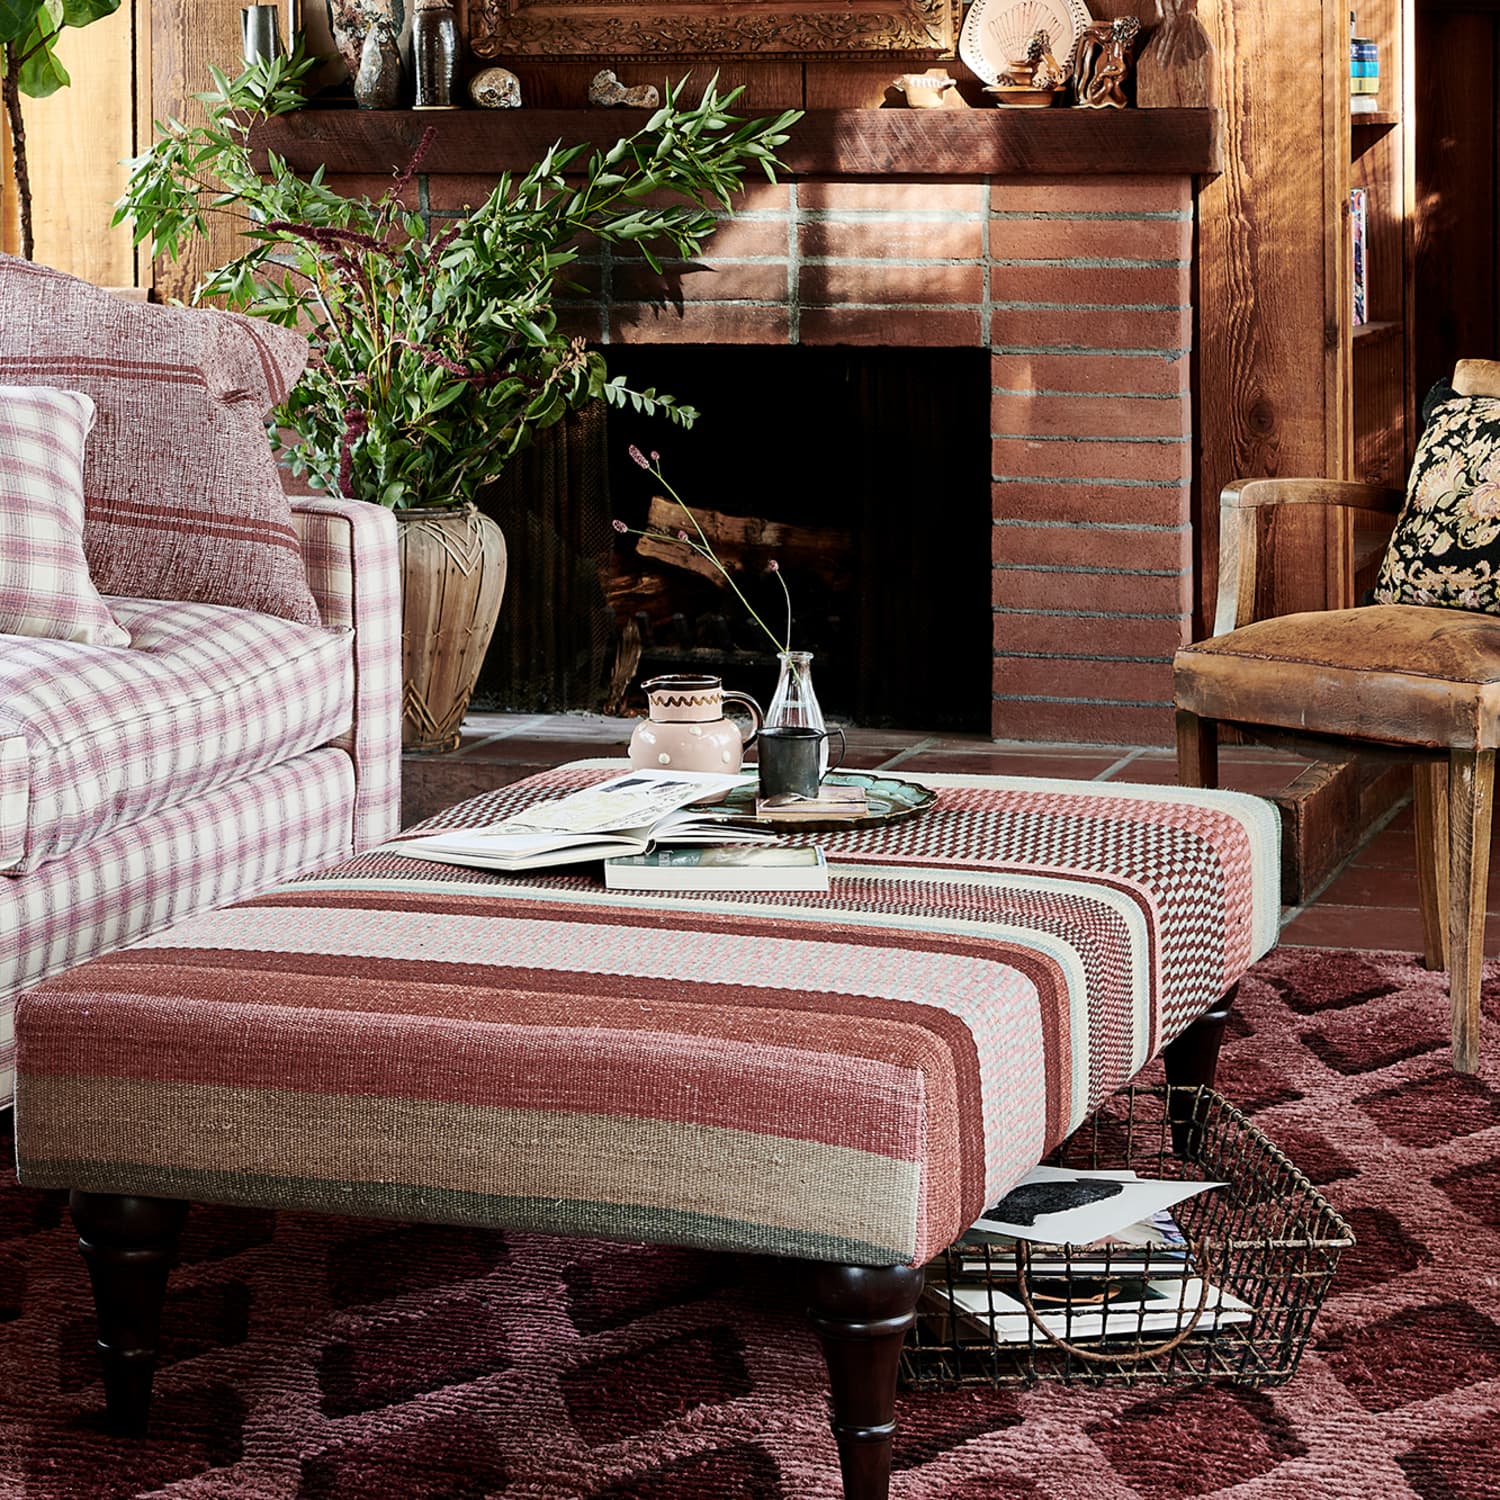 https://cdn.apartmenttherapy.info/image/upload/f_jpg,q_auto:eco,c_fill,g_auto,w_1500,ar_1:1/at%2Fstyle%2Fhadley-square-arm-upholstered-sofa-87-pink-plaid-horizontal